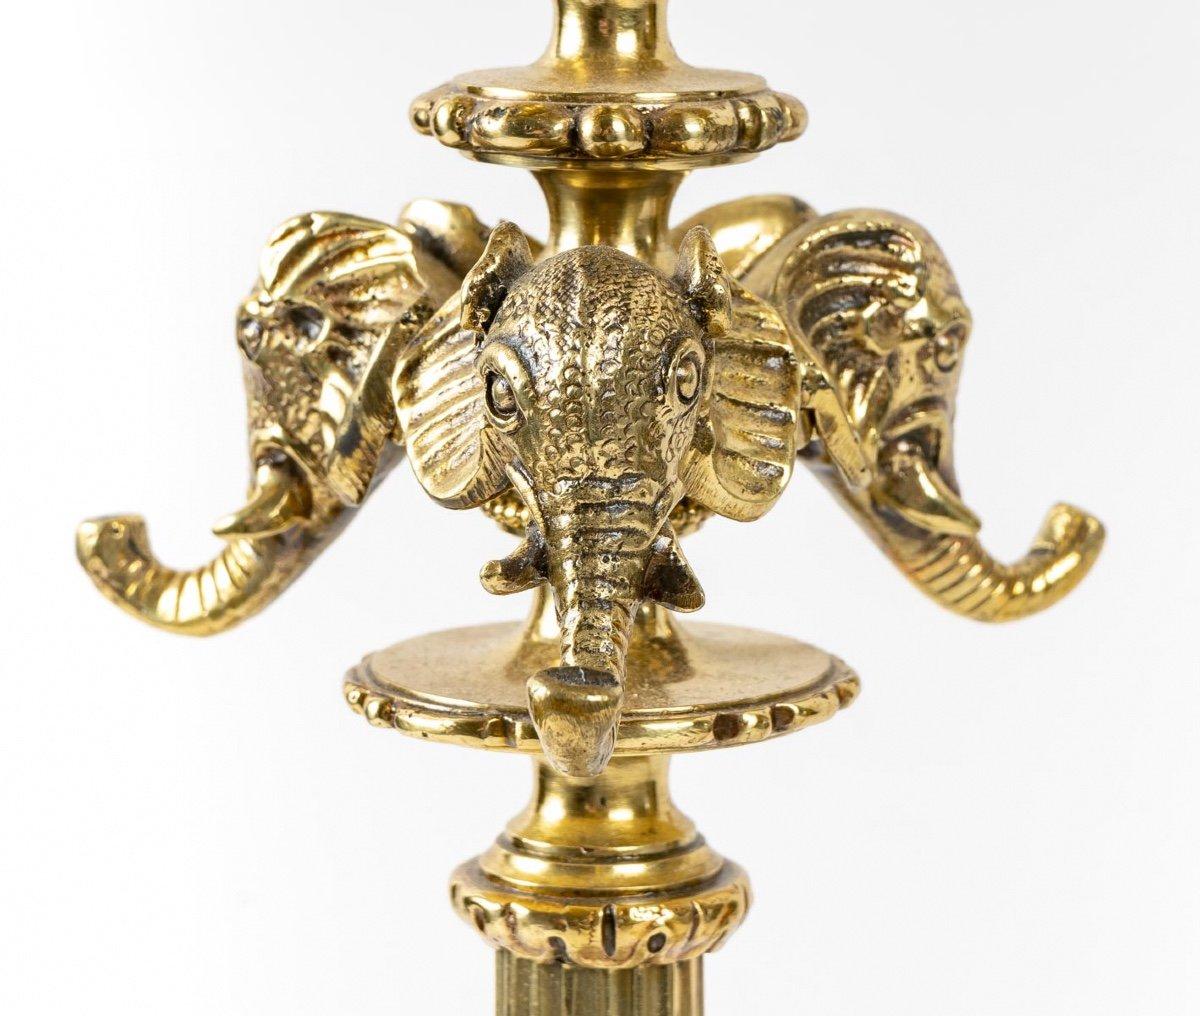 Pair of Gilt Bronze Candlesticks Attributed to F.Barbedienne Period 19th Century For Sale 1